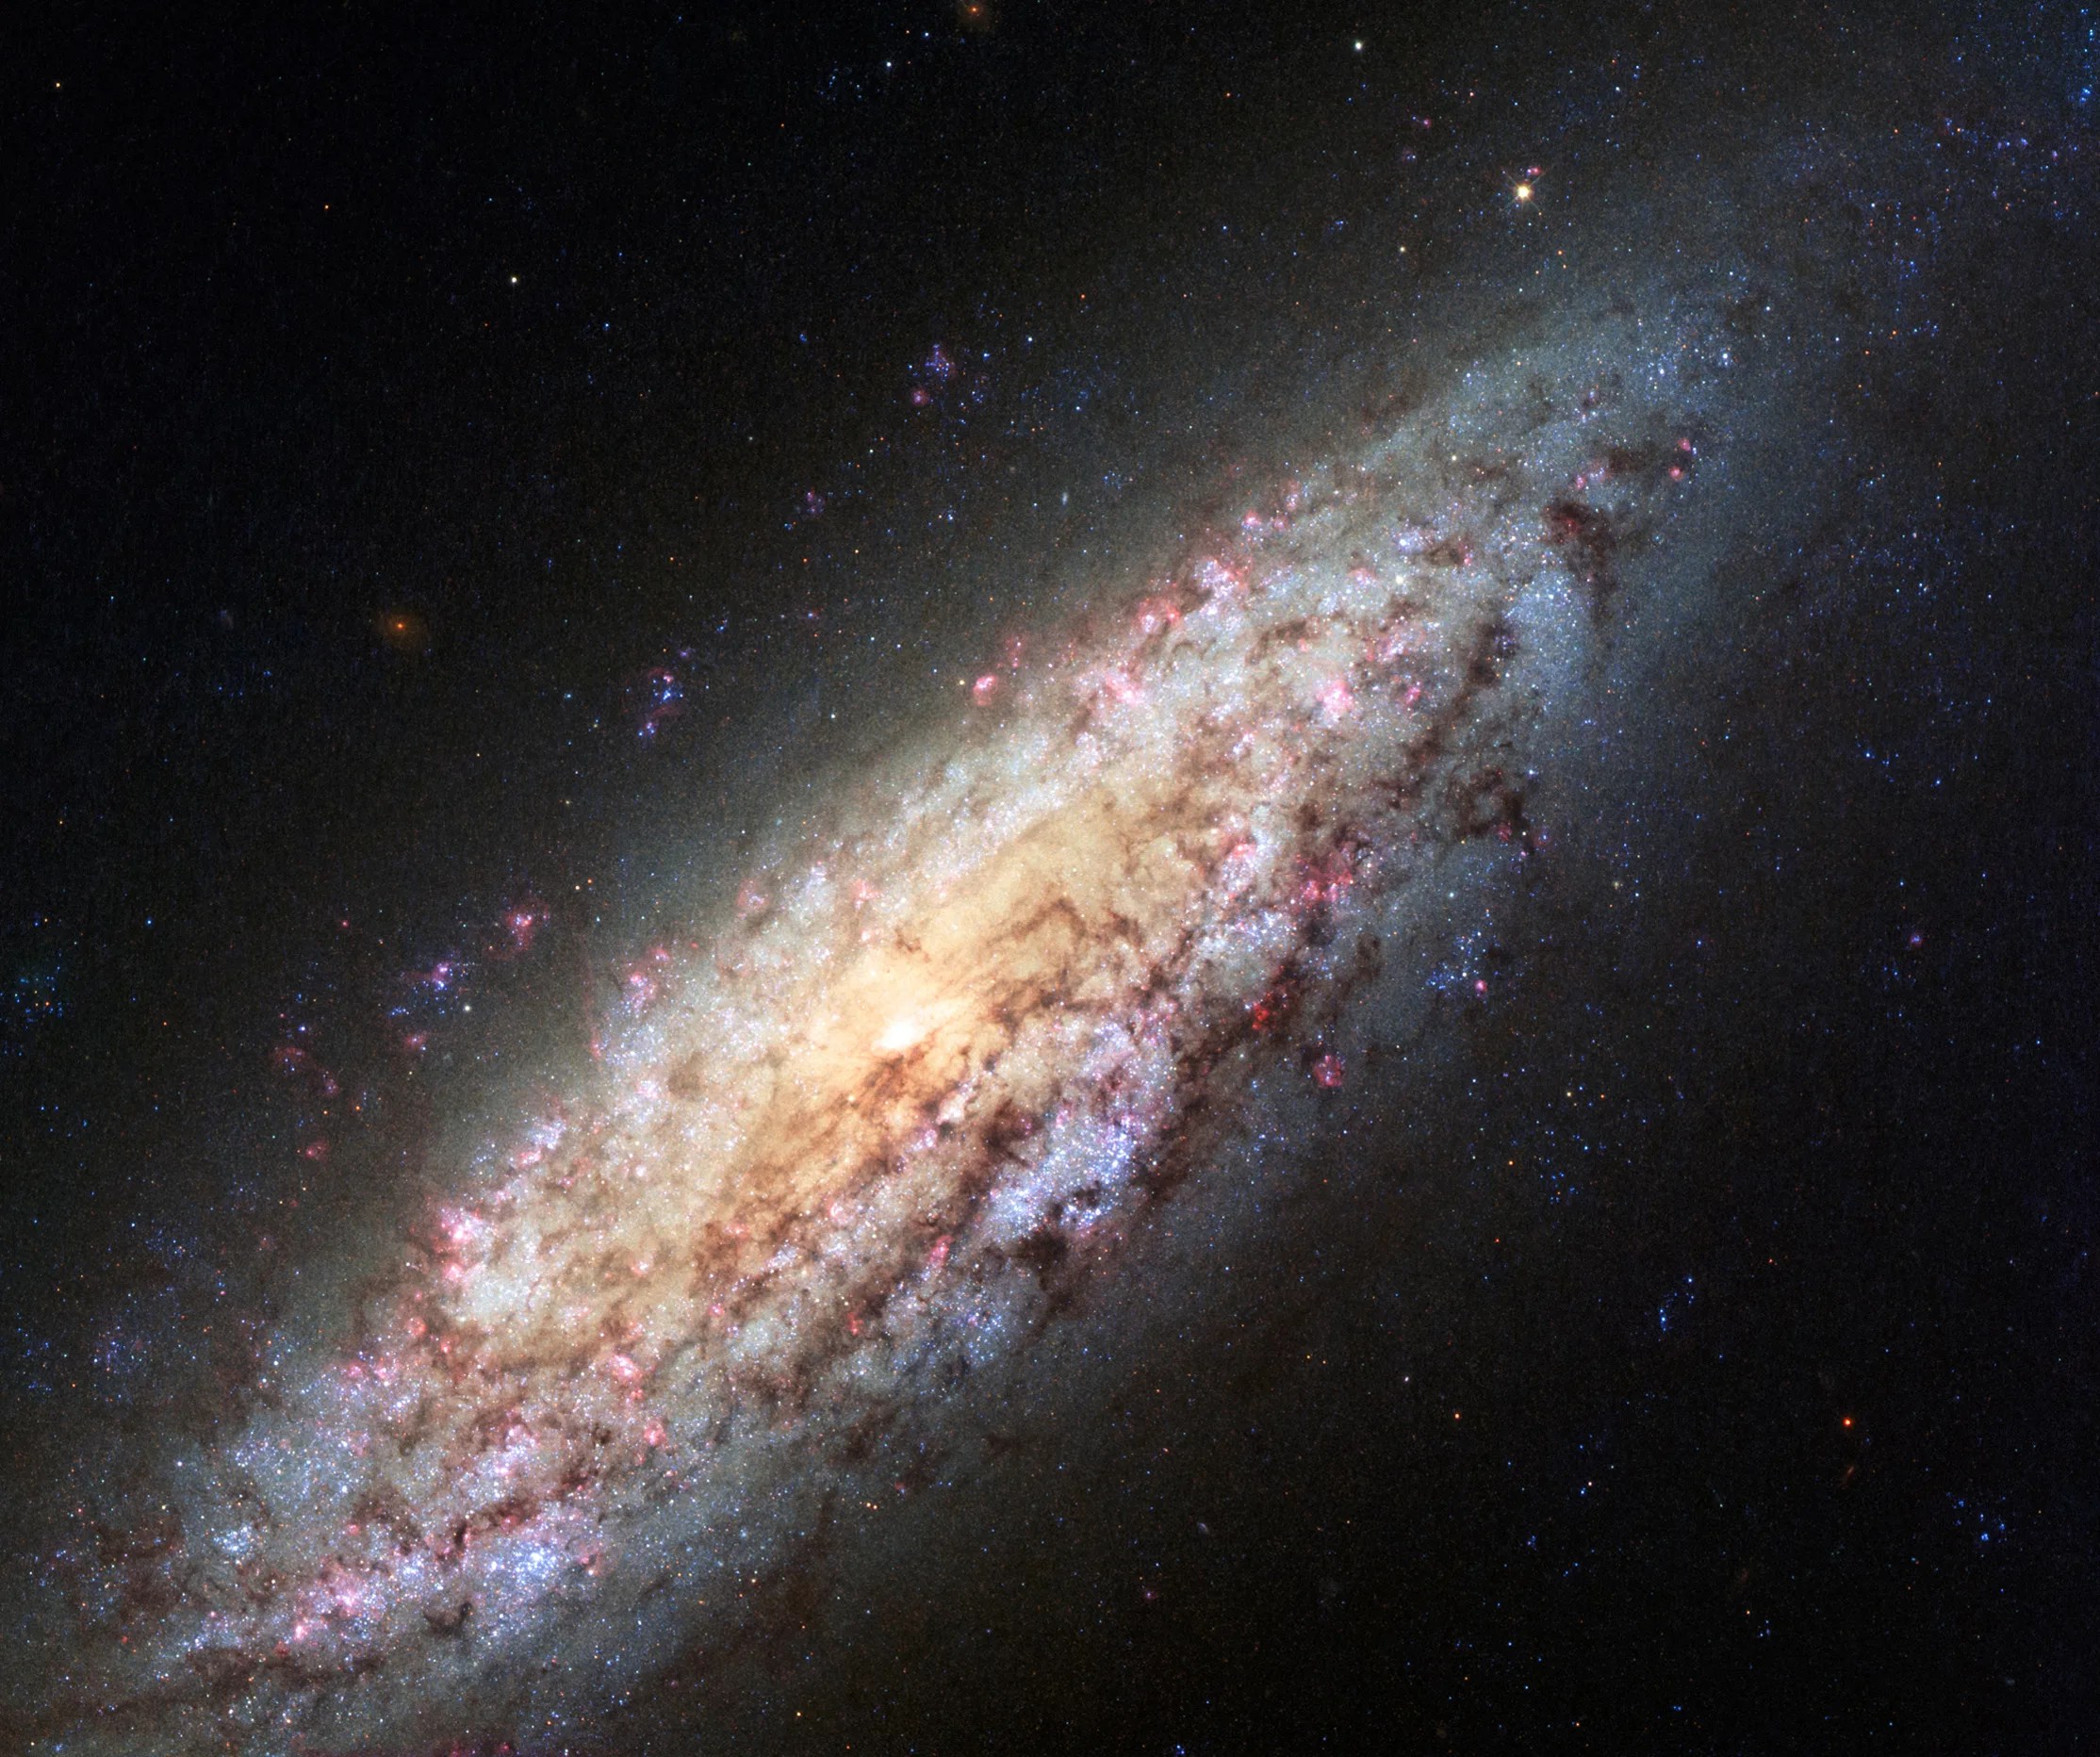 A tilted spiral galaxy fills the image, with a bright core surrounded by spiral arms laced through with dark dust and bright pink and blue star formation.